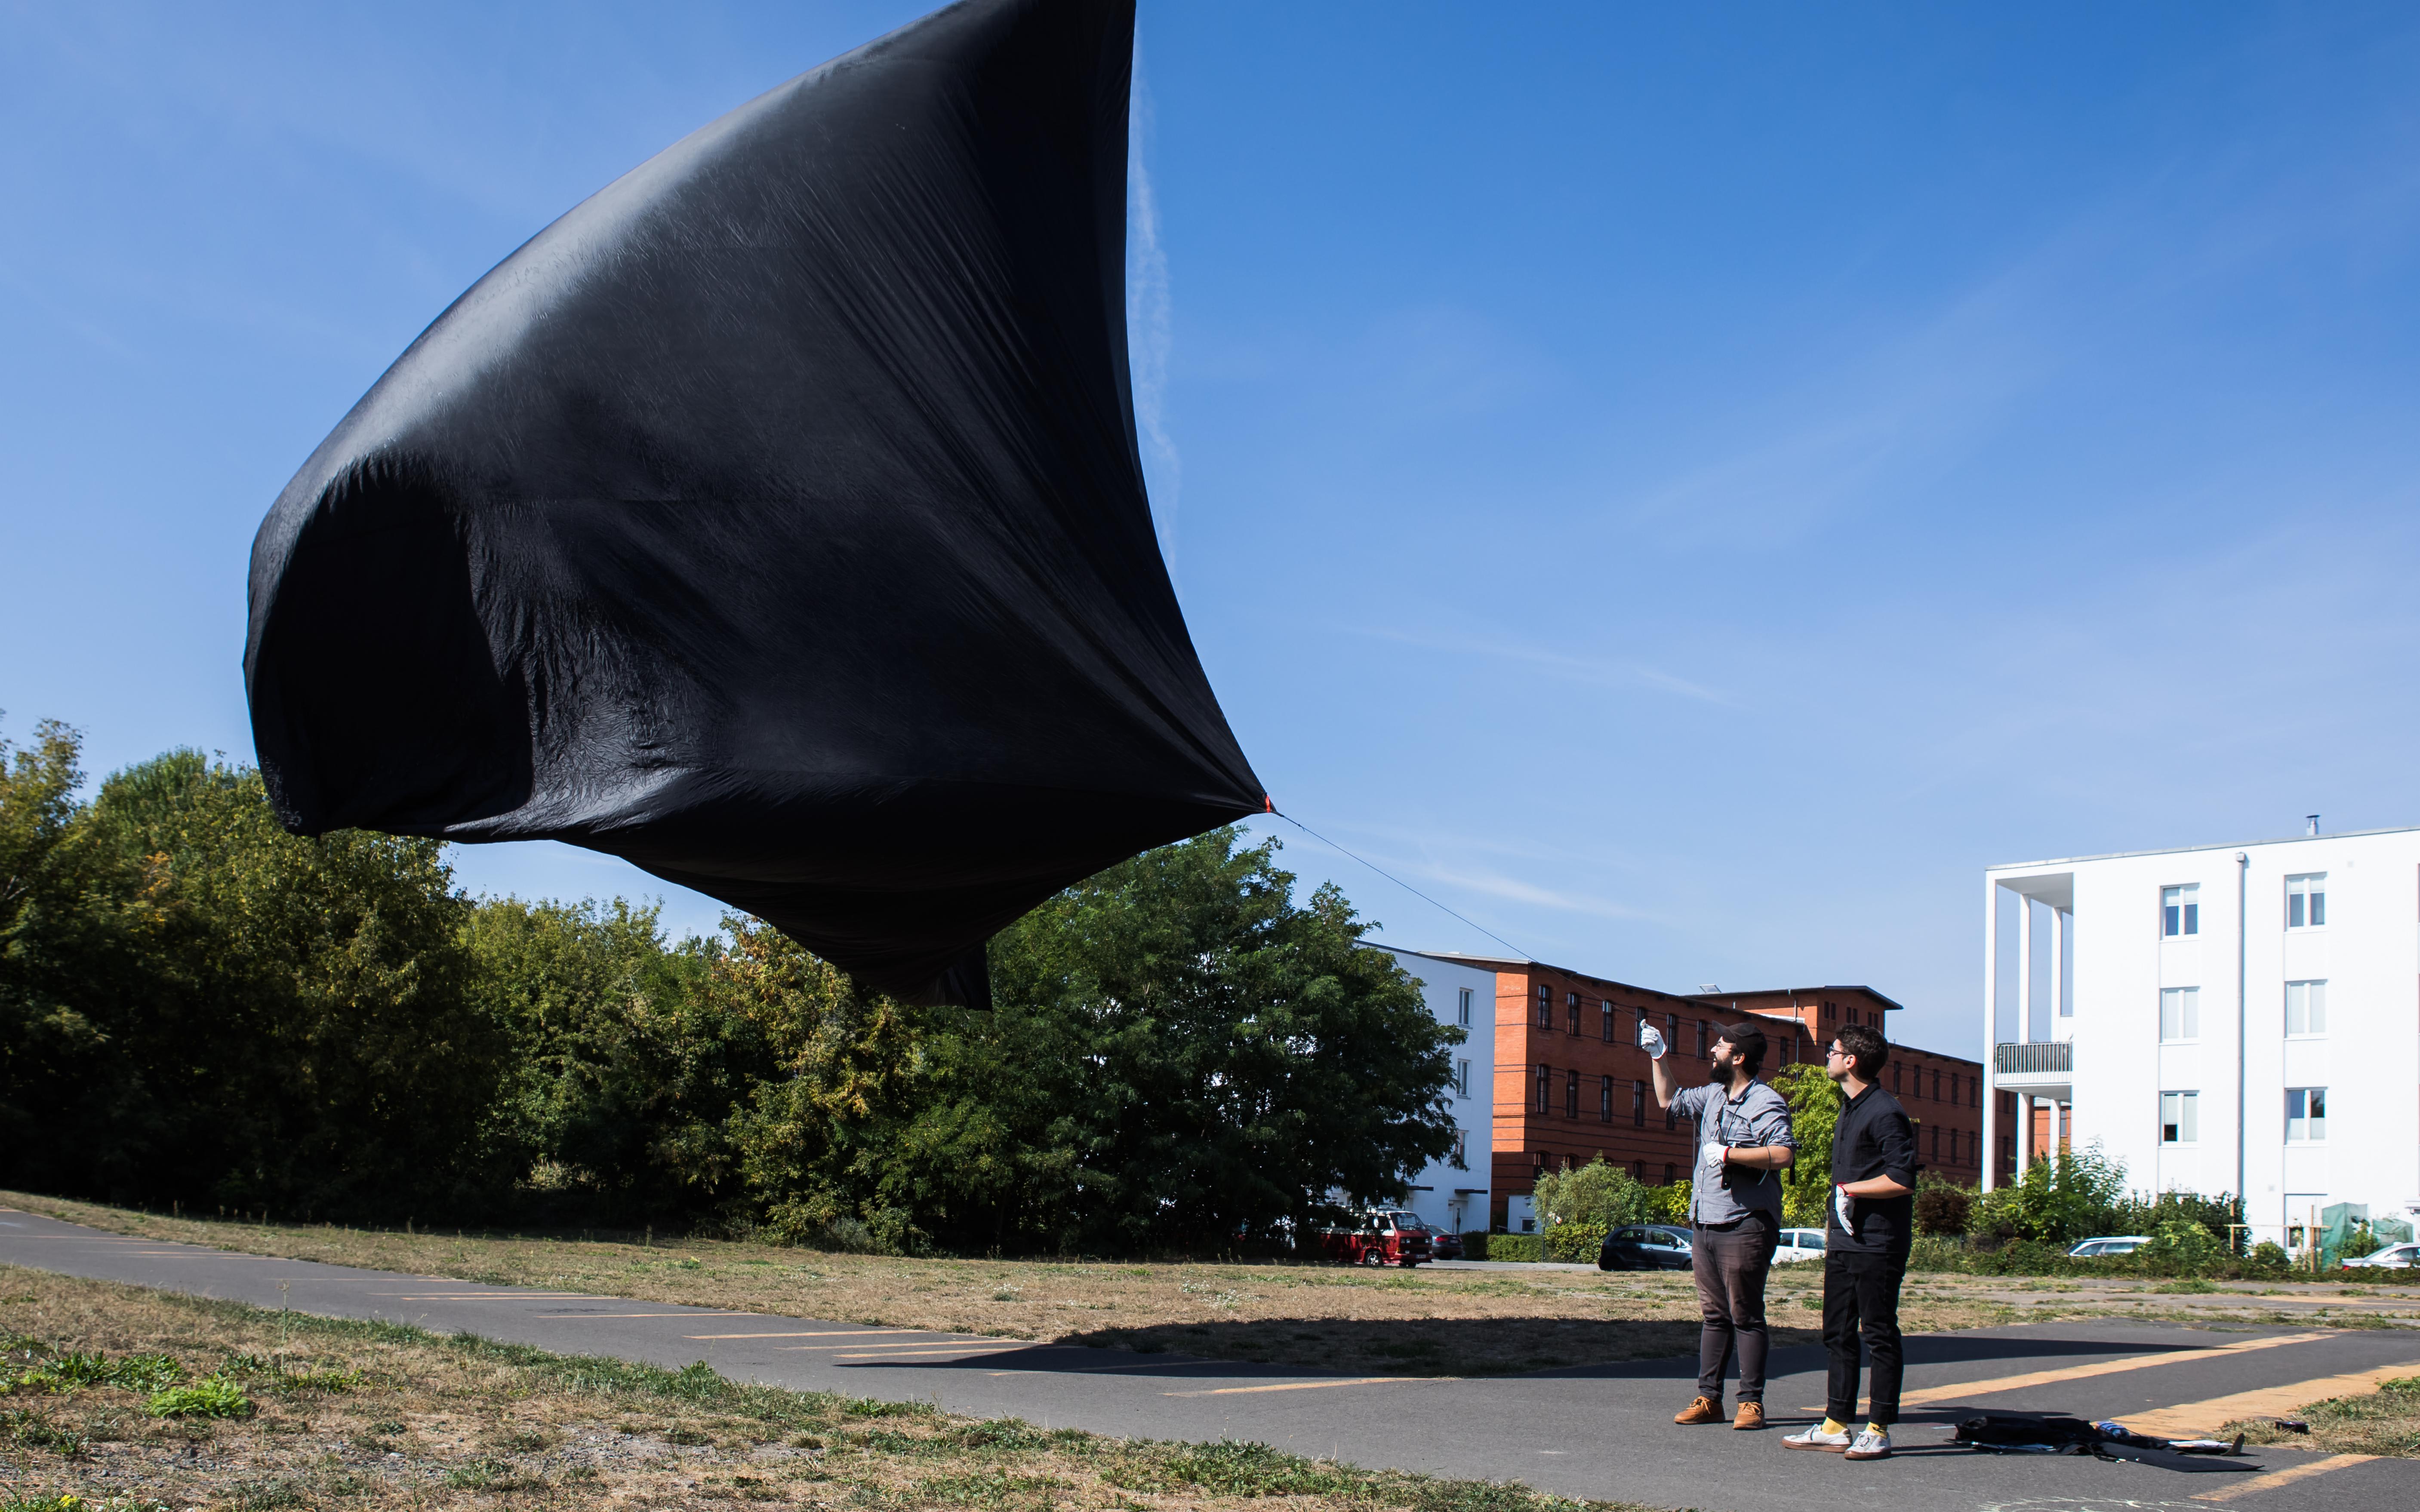 Saraceno designed the Aerocene Explorer as an open-source flight device that requires no fossil fuels or gases. Photo courtesy of Audemars Piguet.